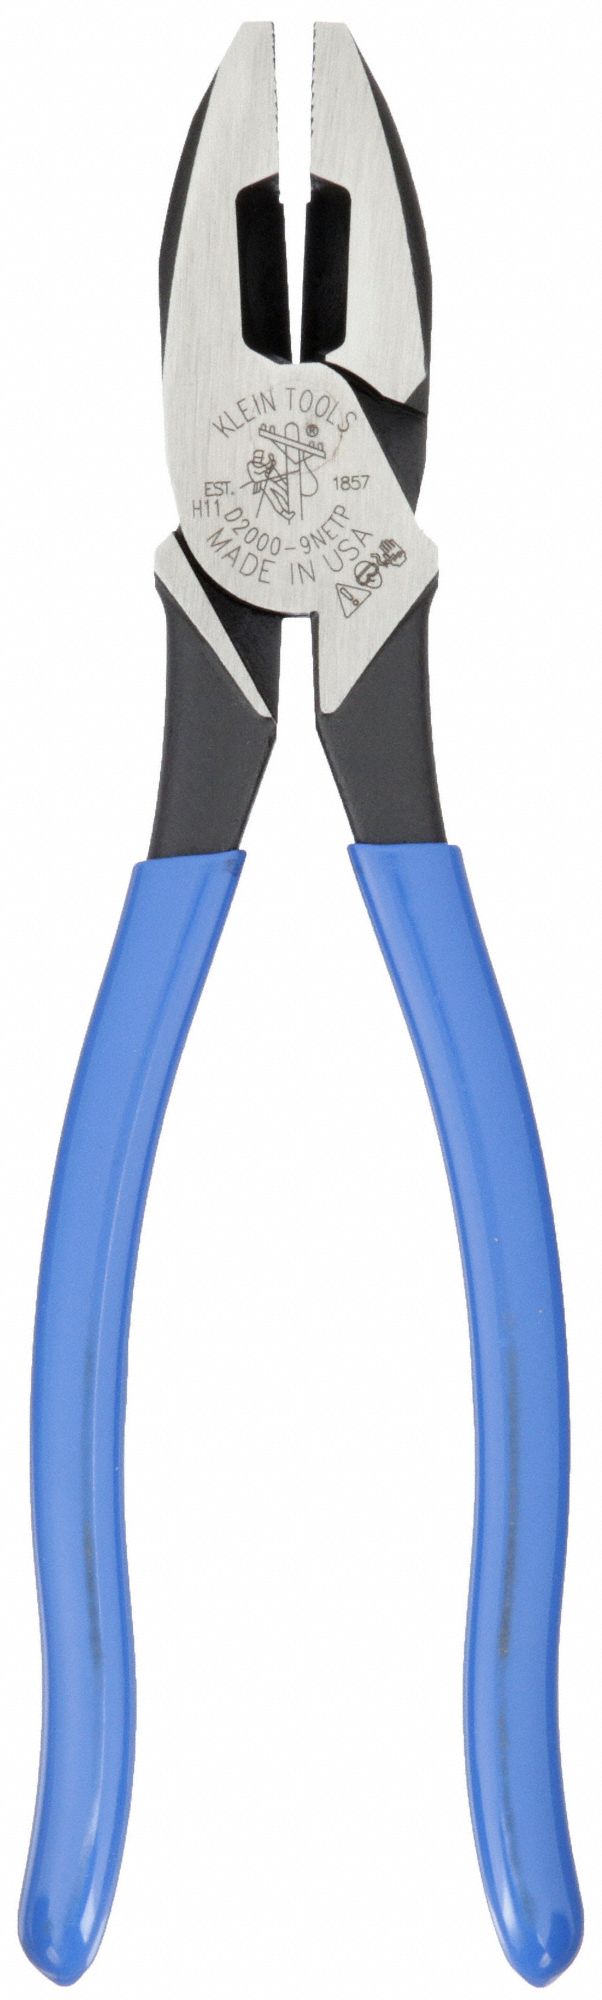 Klein Tools D2000-9NETP 9 Side Cutting Pliers